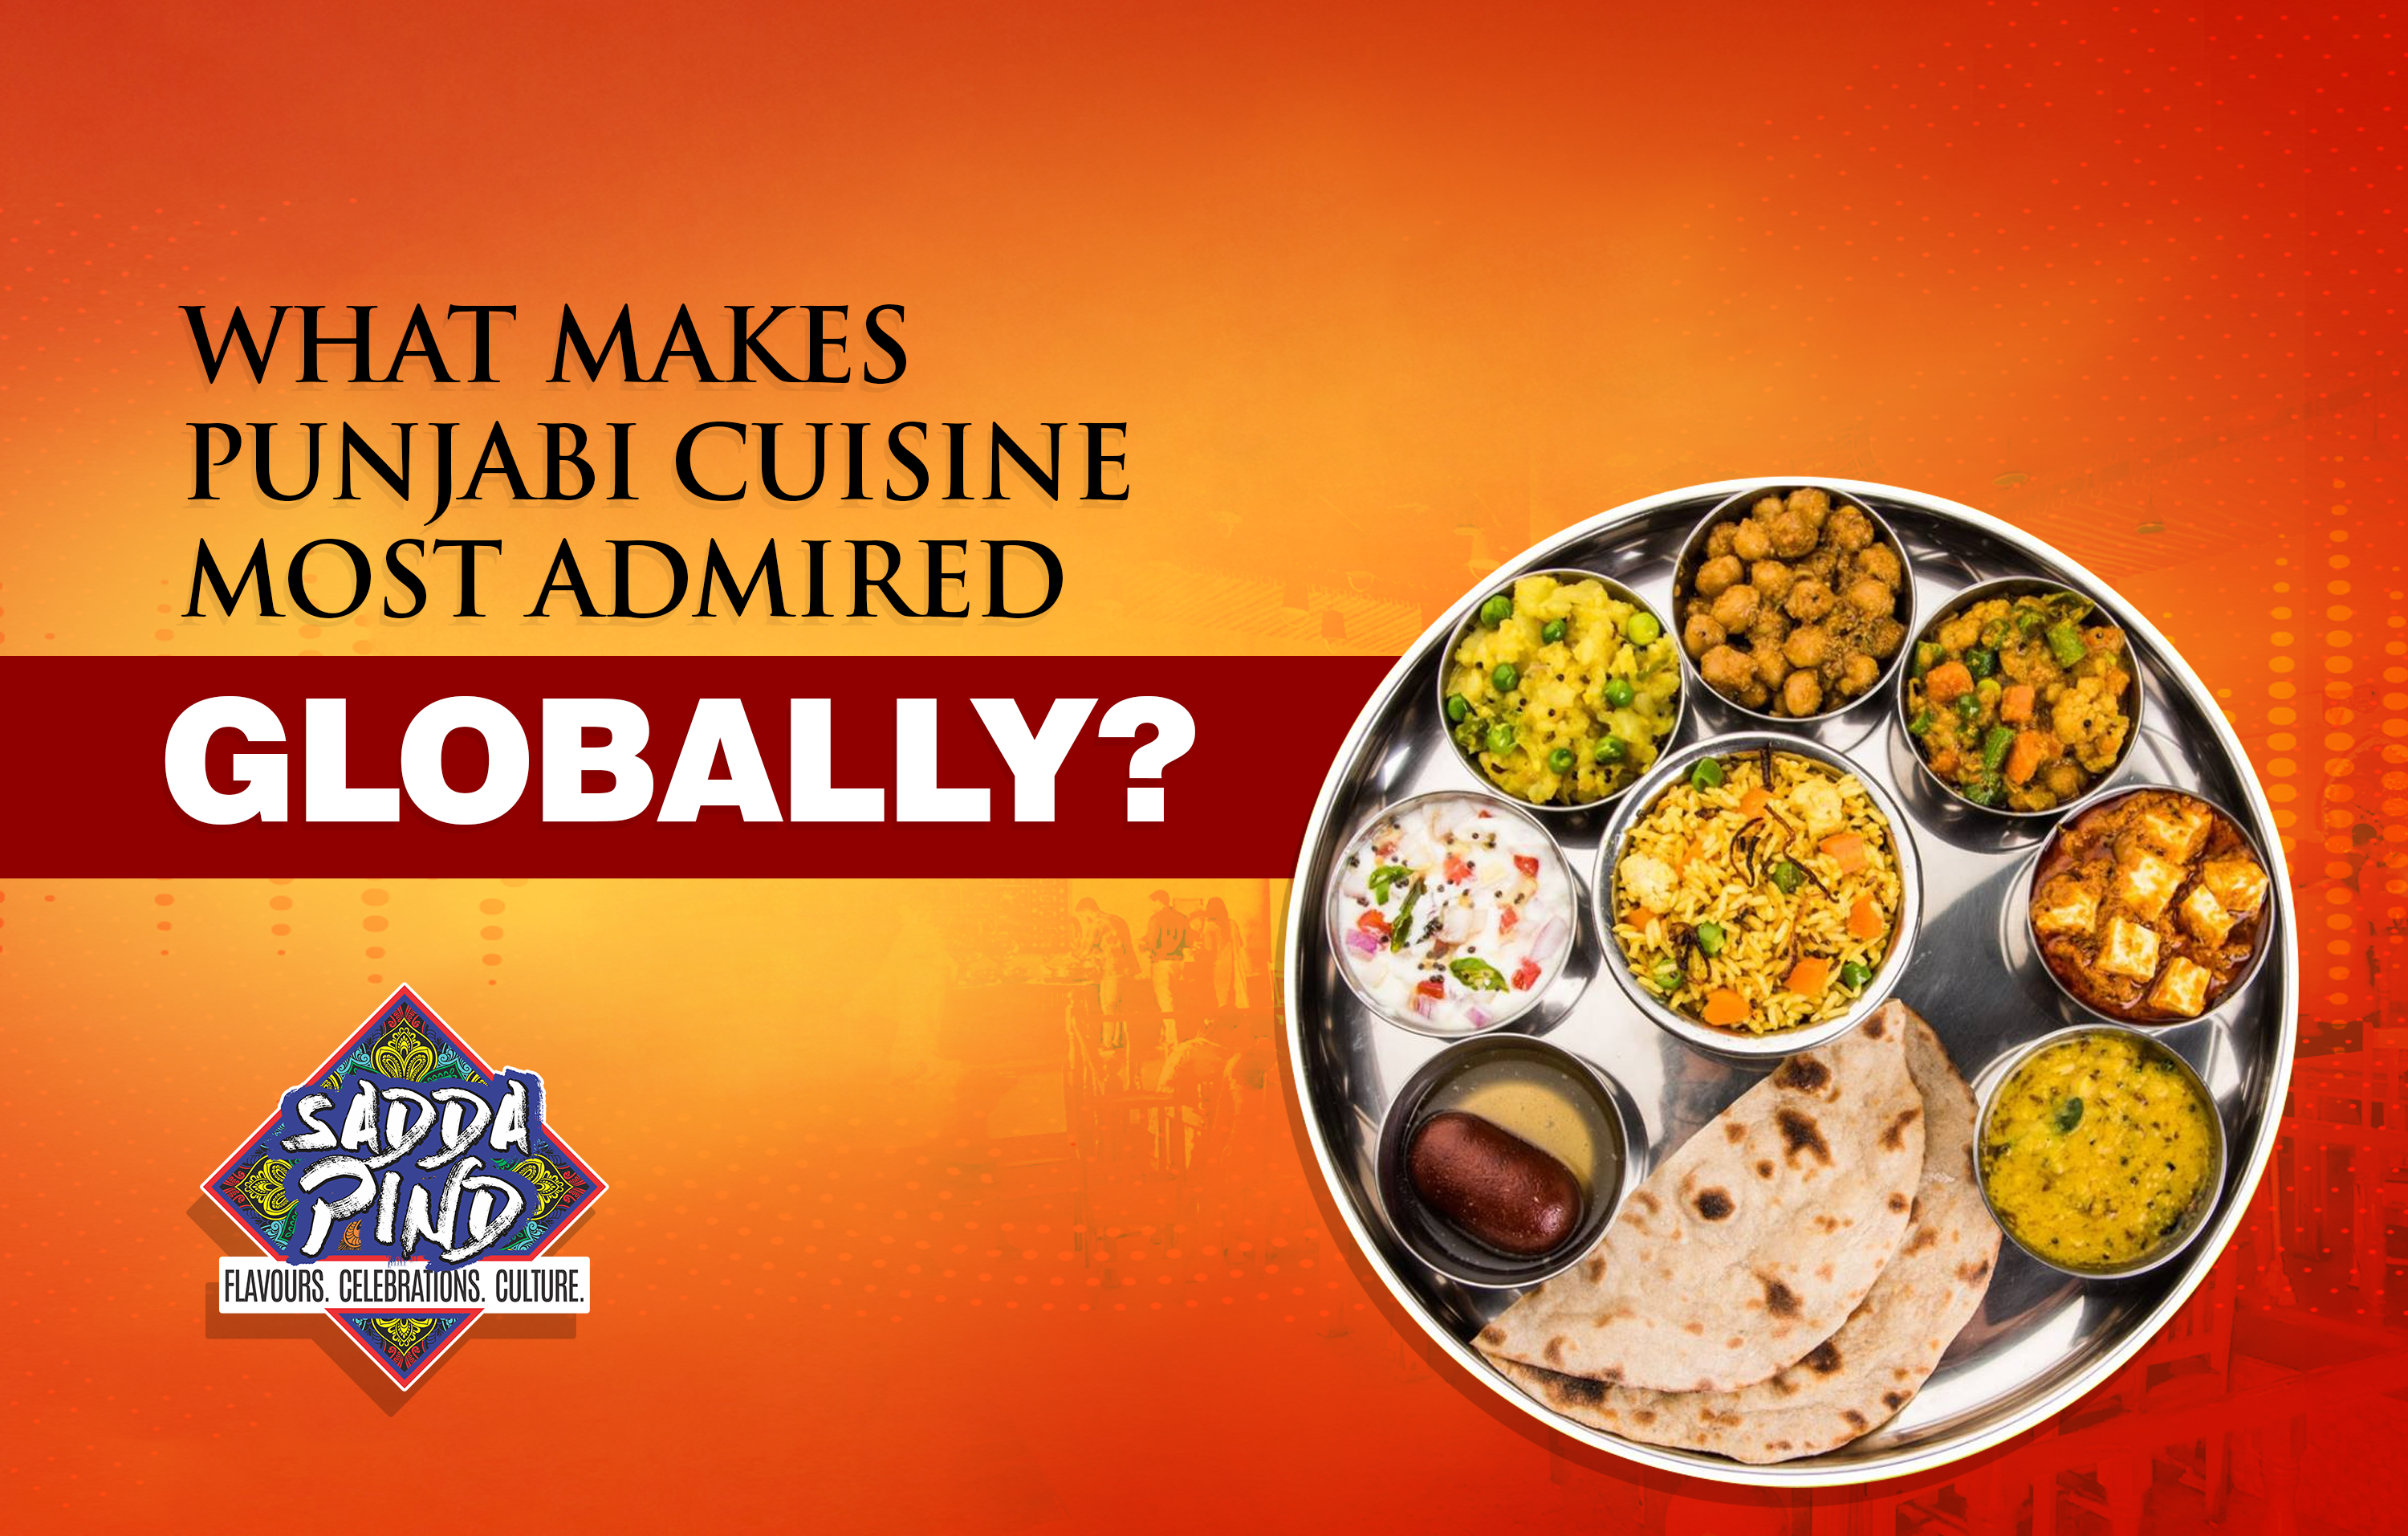 What Makes Punjabi Cuisine Most Admired Globally